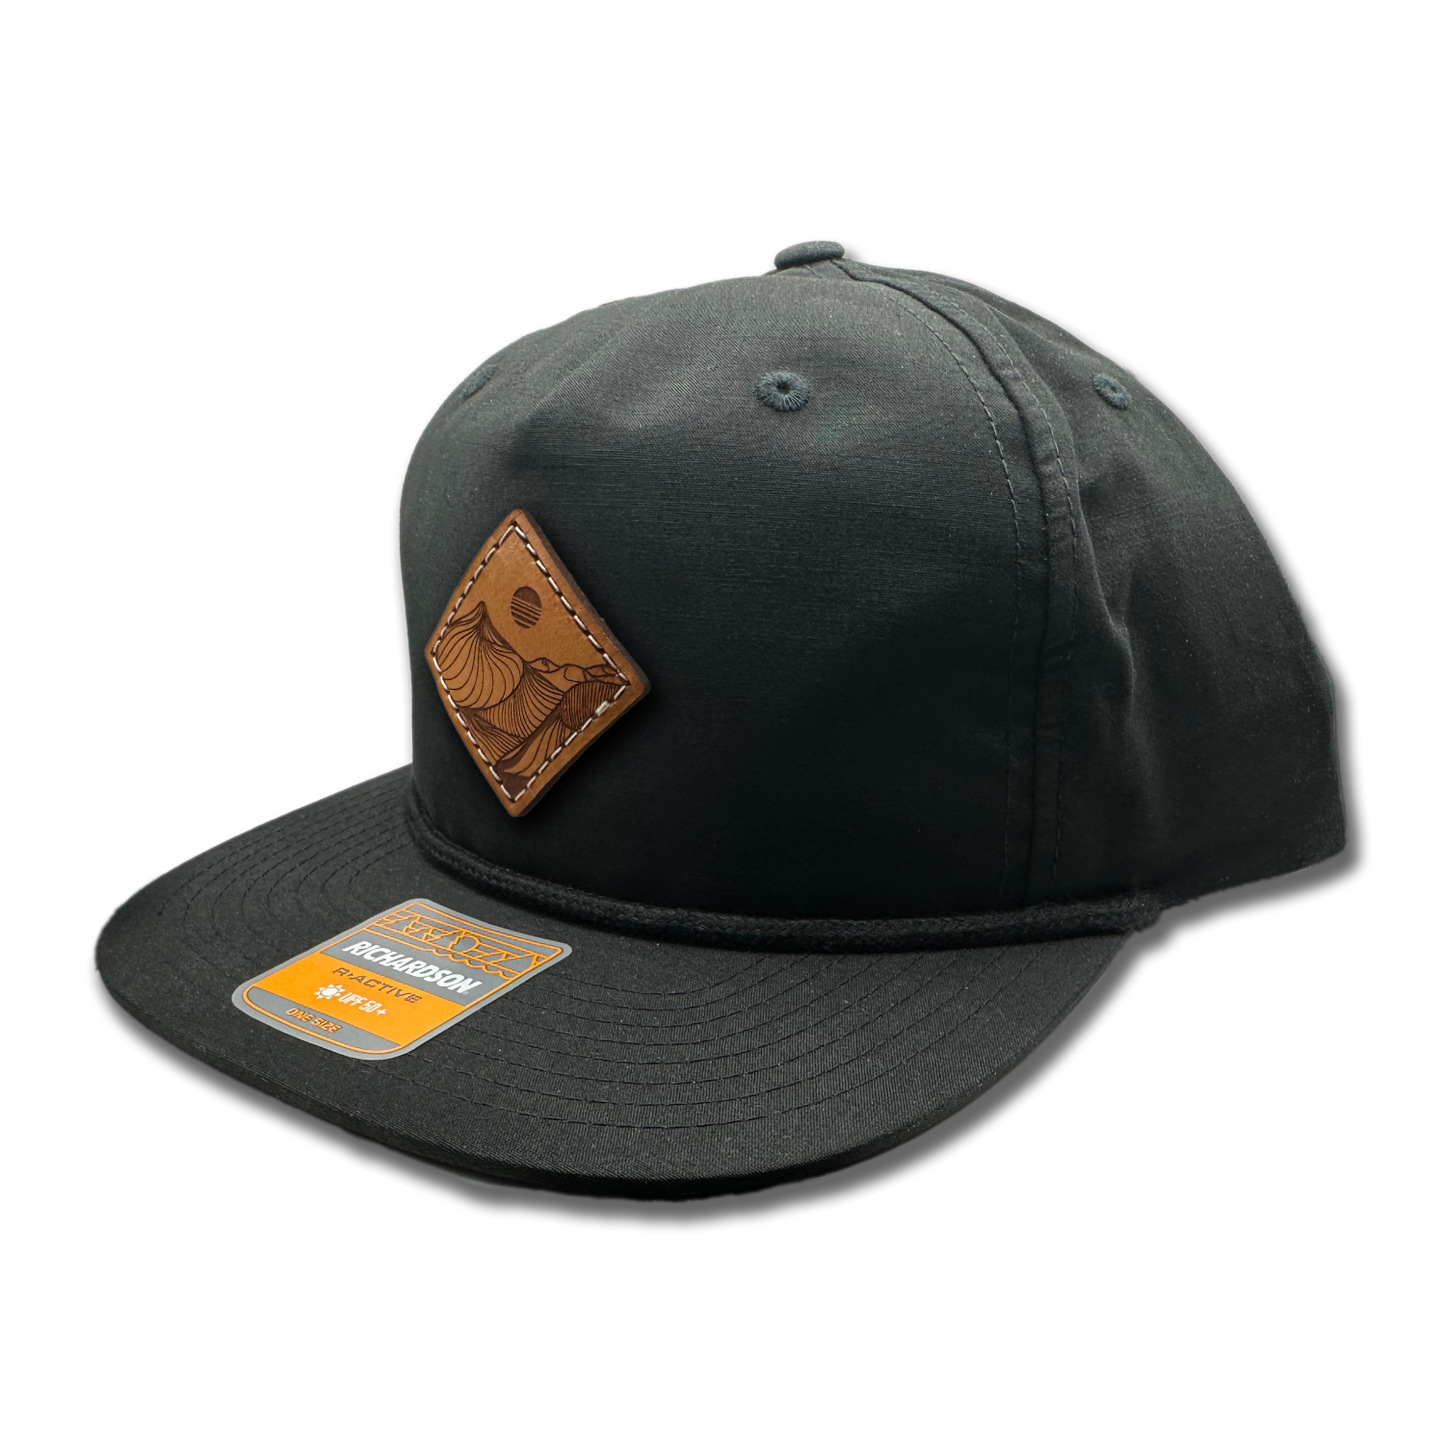 Add a touch of rugged charm to your look with the Black Richardson 256 Rope Umpqua Hat. Made in Colorado, USA, this low profile SnapBack cap features a Desert Mountain patch design and genuine leather patch sewn on. Stay stylish with its flatbill and lightweight material.